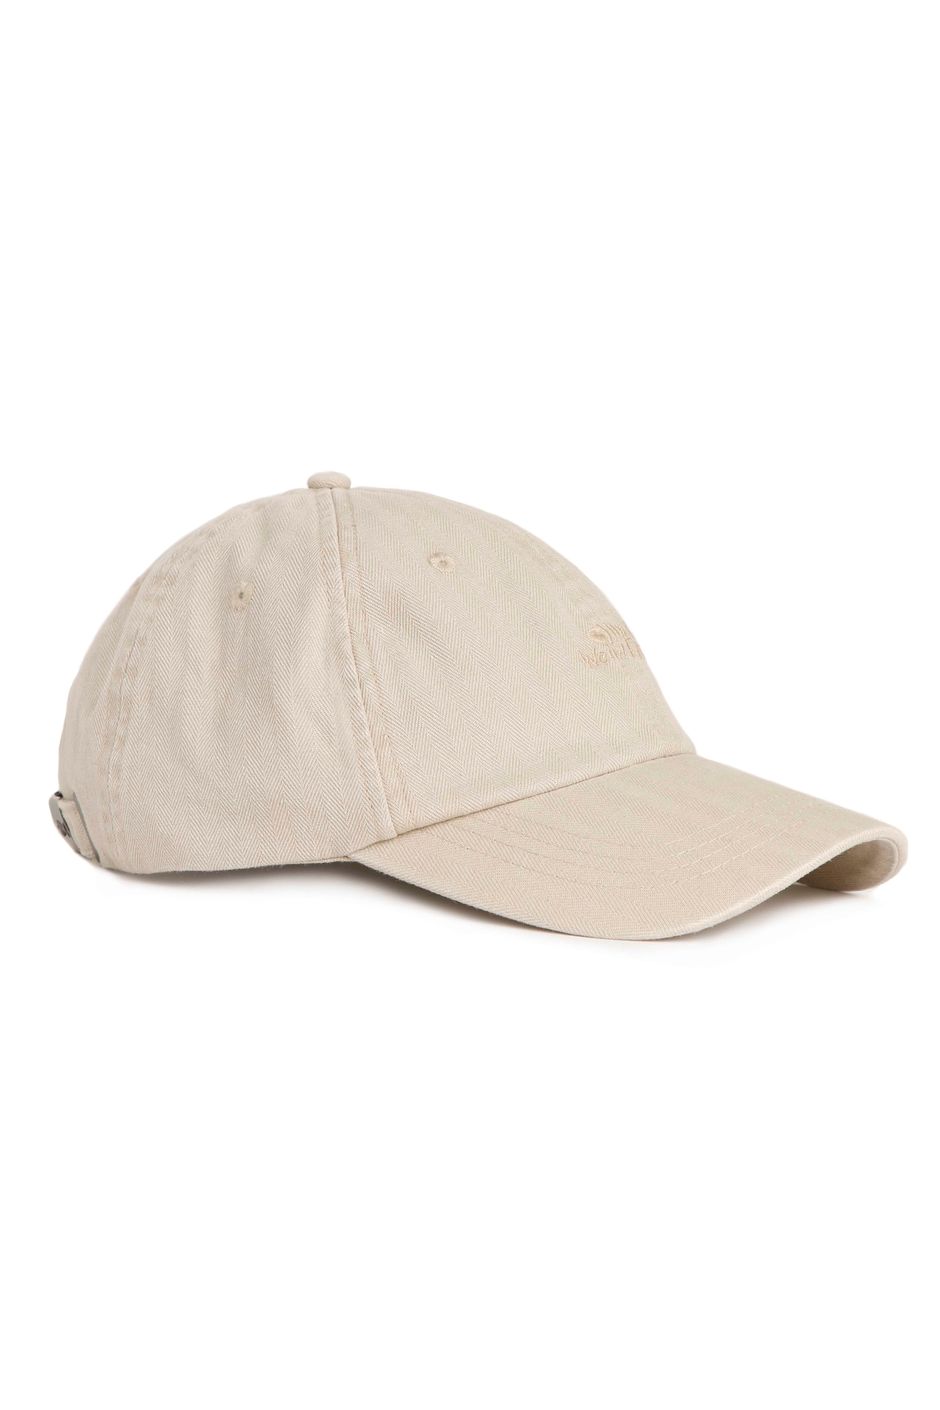 Scarfell Unisex Washed Branded Cap Stone